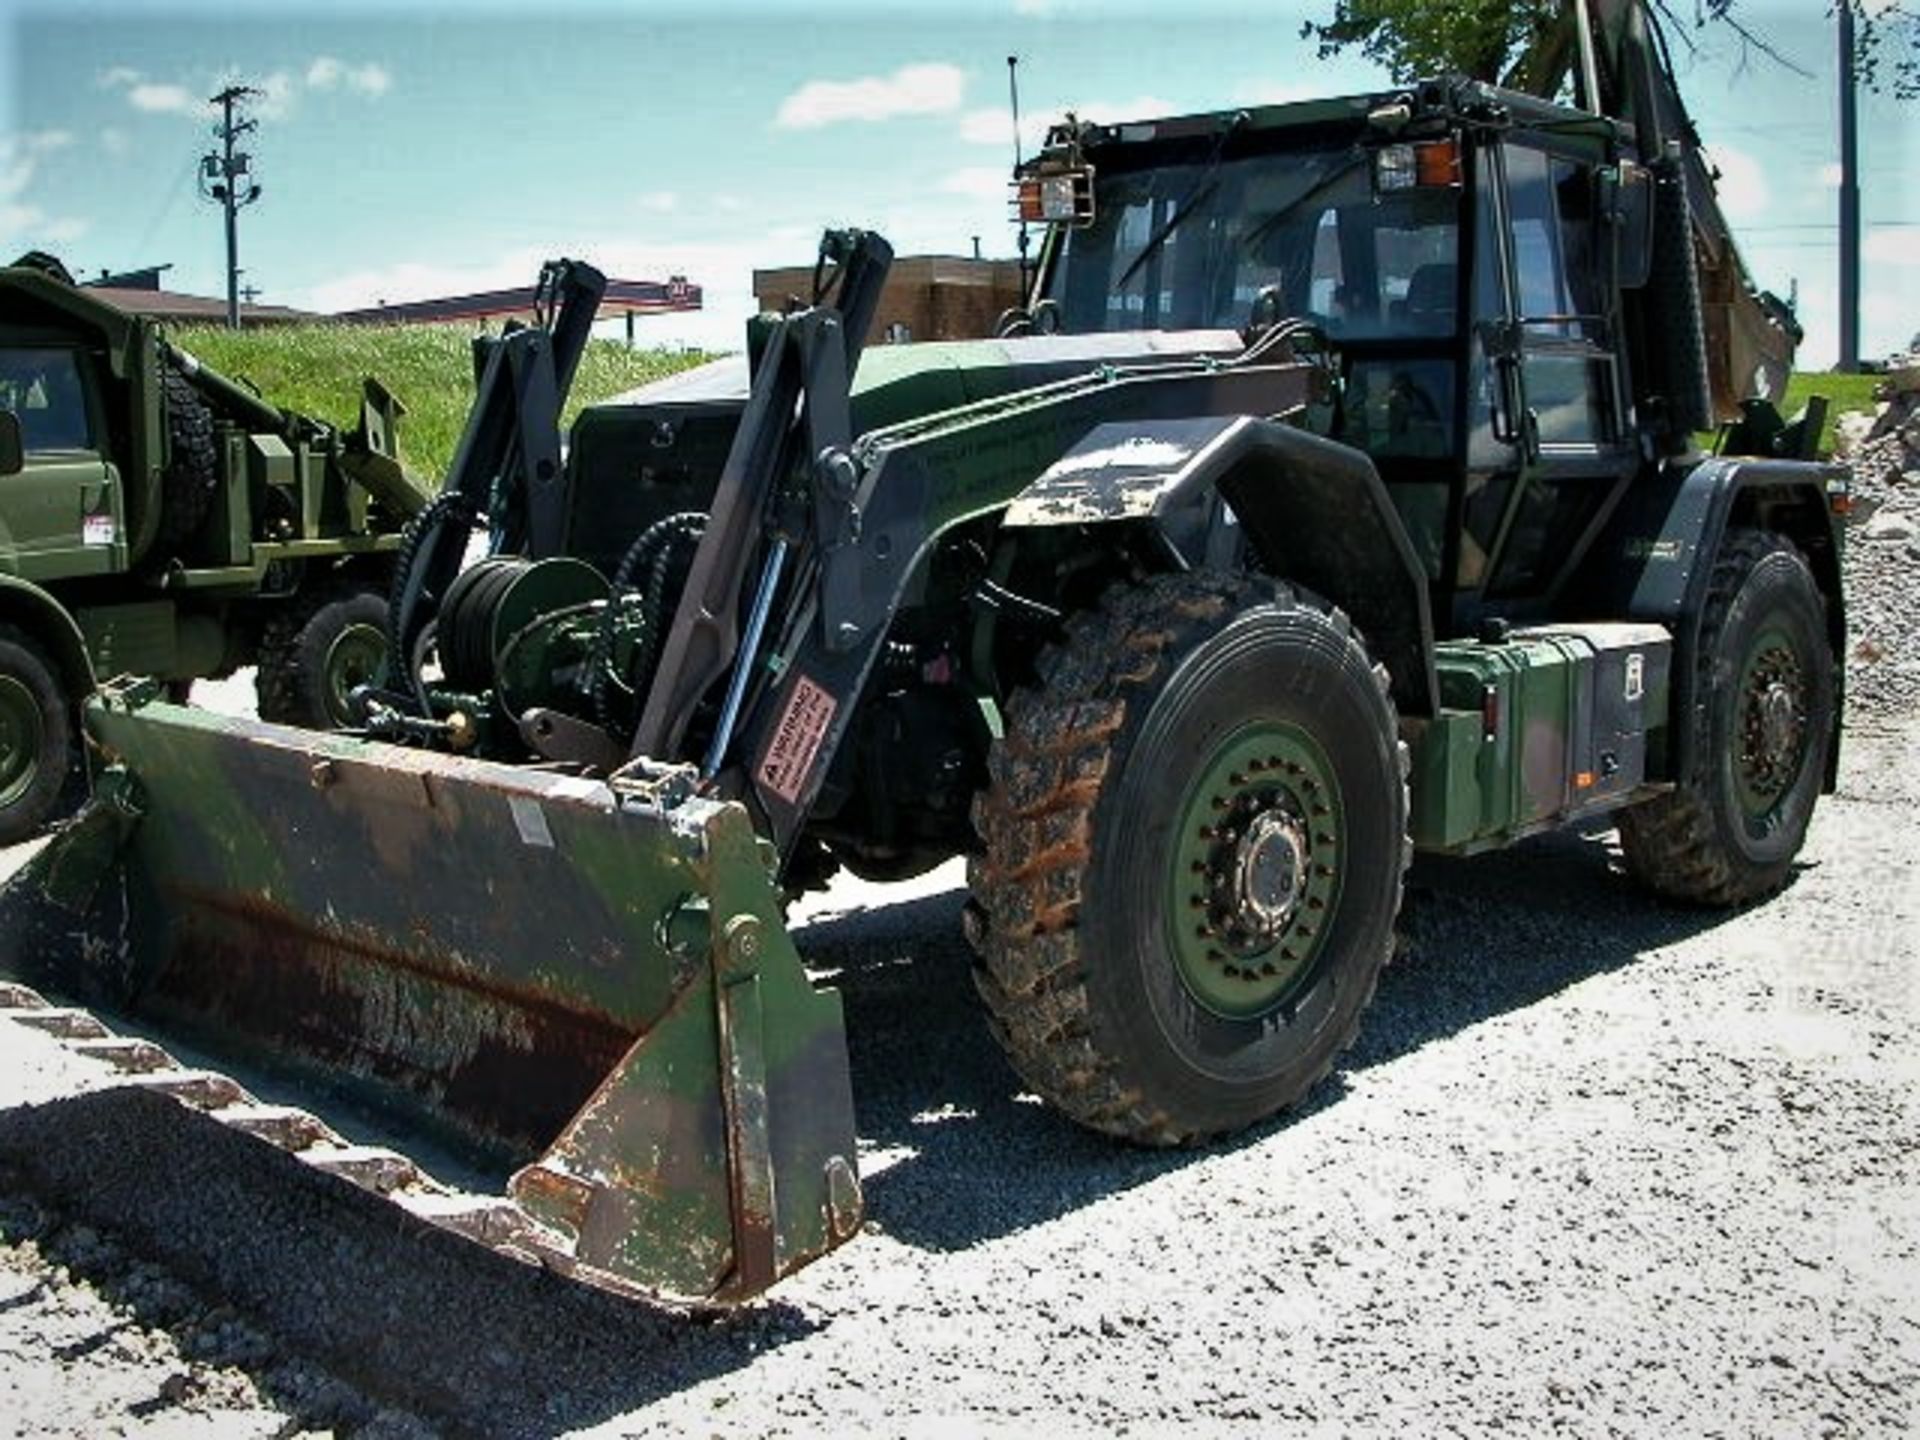 IHMEE - Military High Mobility Engineering Vehicle/Excavator - (3124 Miles) - Excellent Condition!